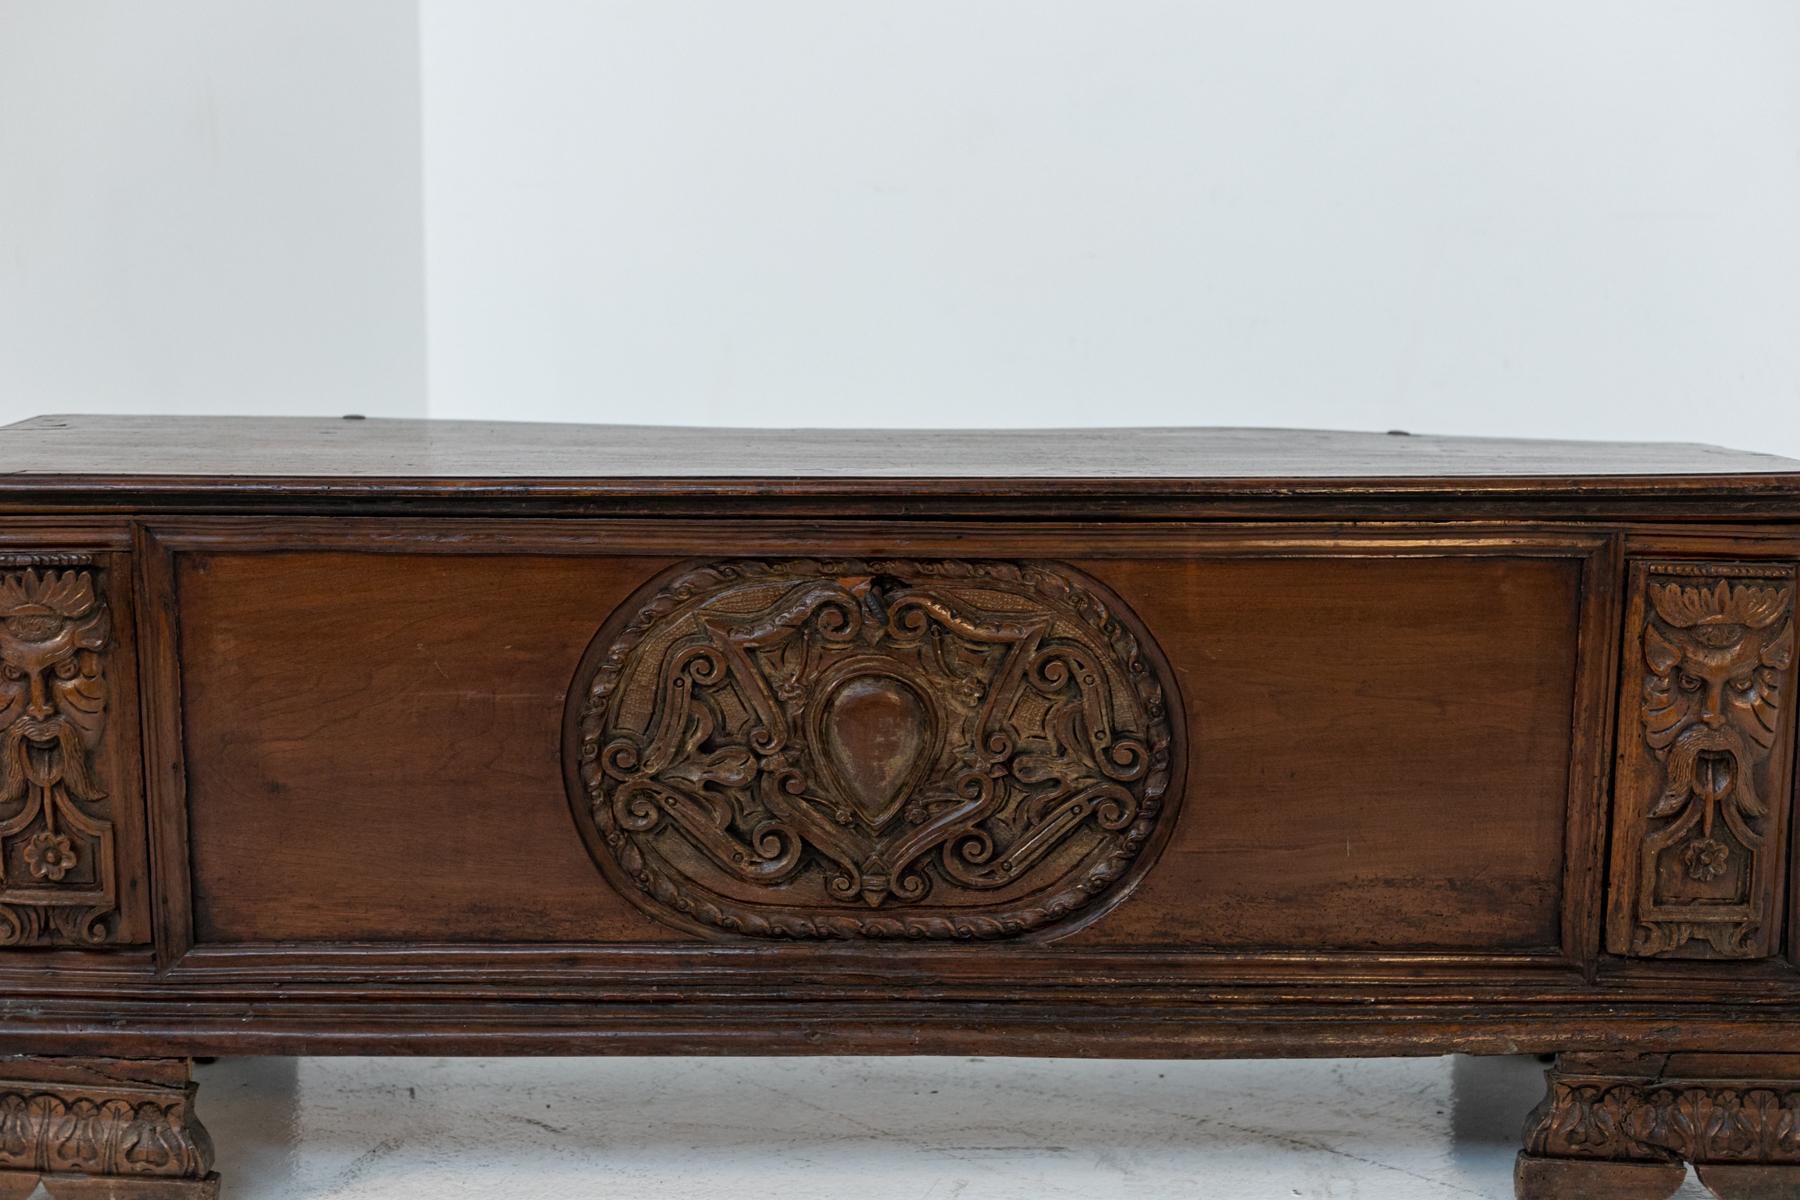 Antique bench or chest of drawers made of Italian walnut precisely from Tuscany. It is dated from the end of 500th. The wood of the chest of drawers has been beautifully worked with ornamental carvings and allegorical shapes. Note the feet also in